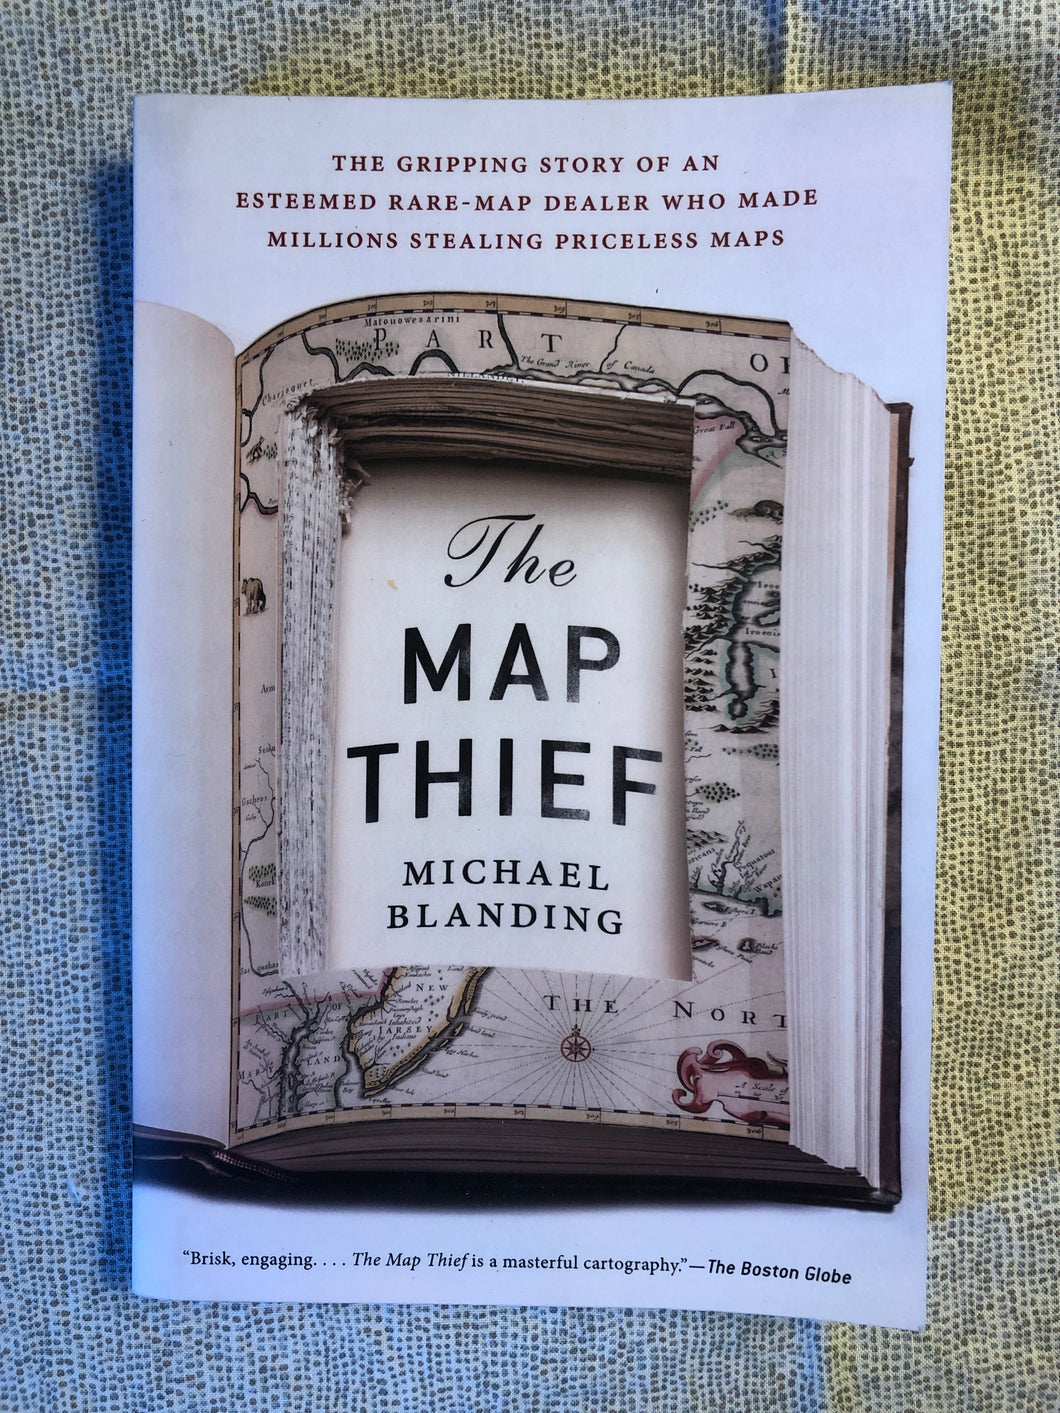 The Map Thief: The Gripping Story Of An Esteemed Rare-Map Dealer Who Made Millions Stealing Priceless Maps